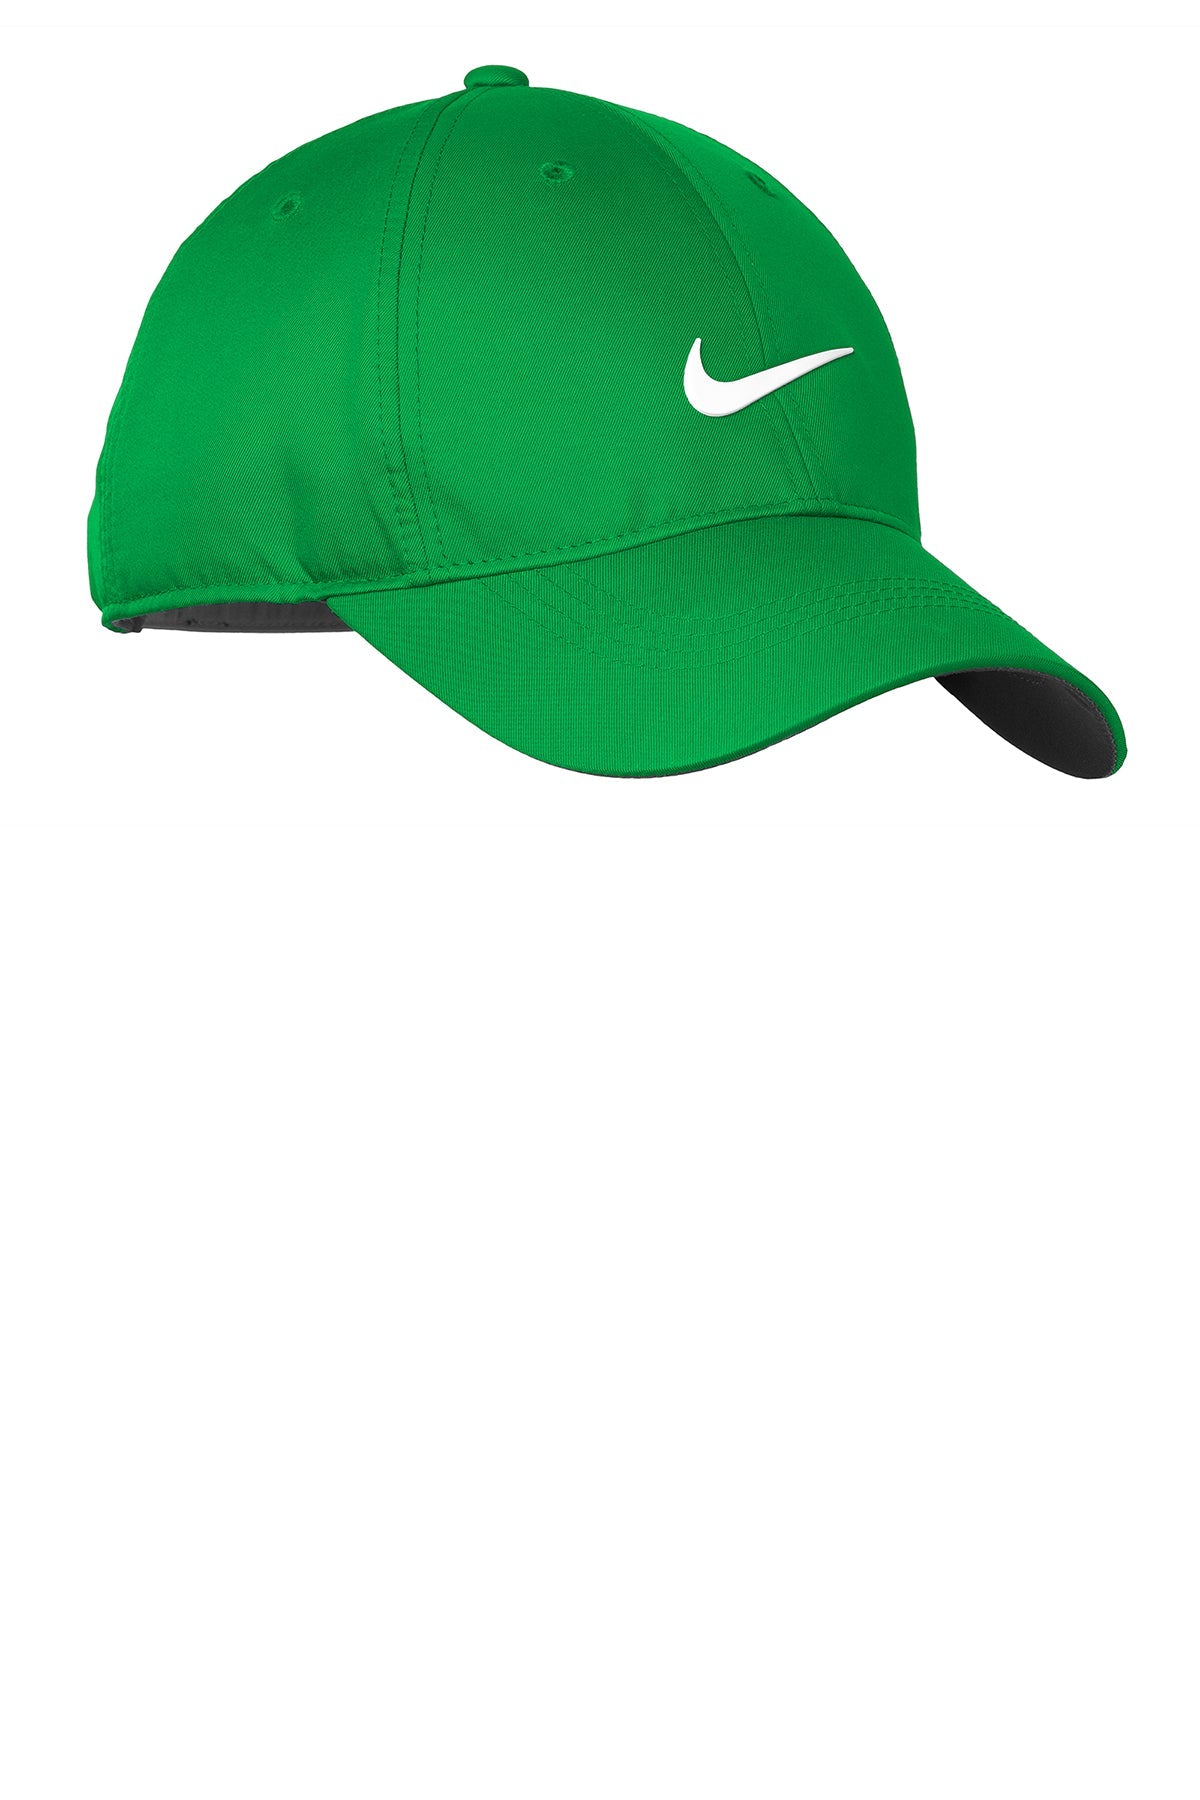 Nike Dri-FIT Swoosh Front Customized Caps, Lucky Green